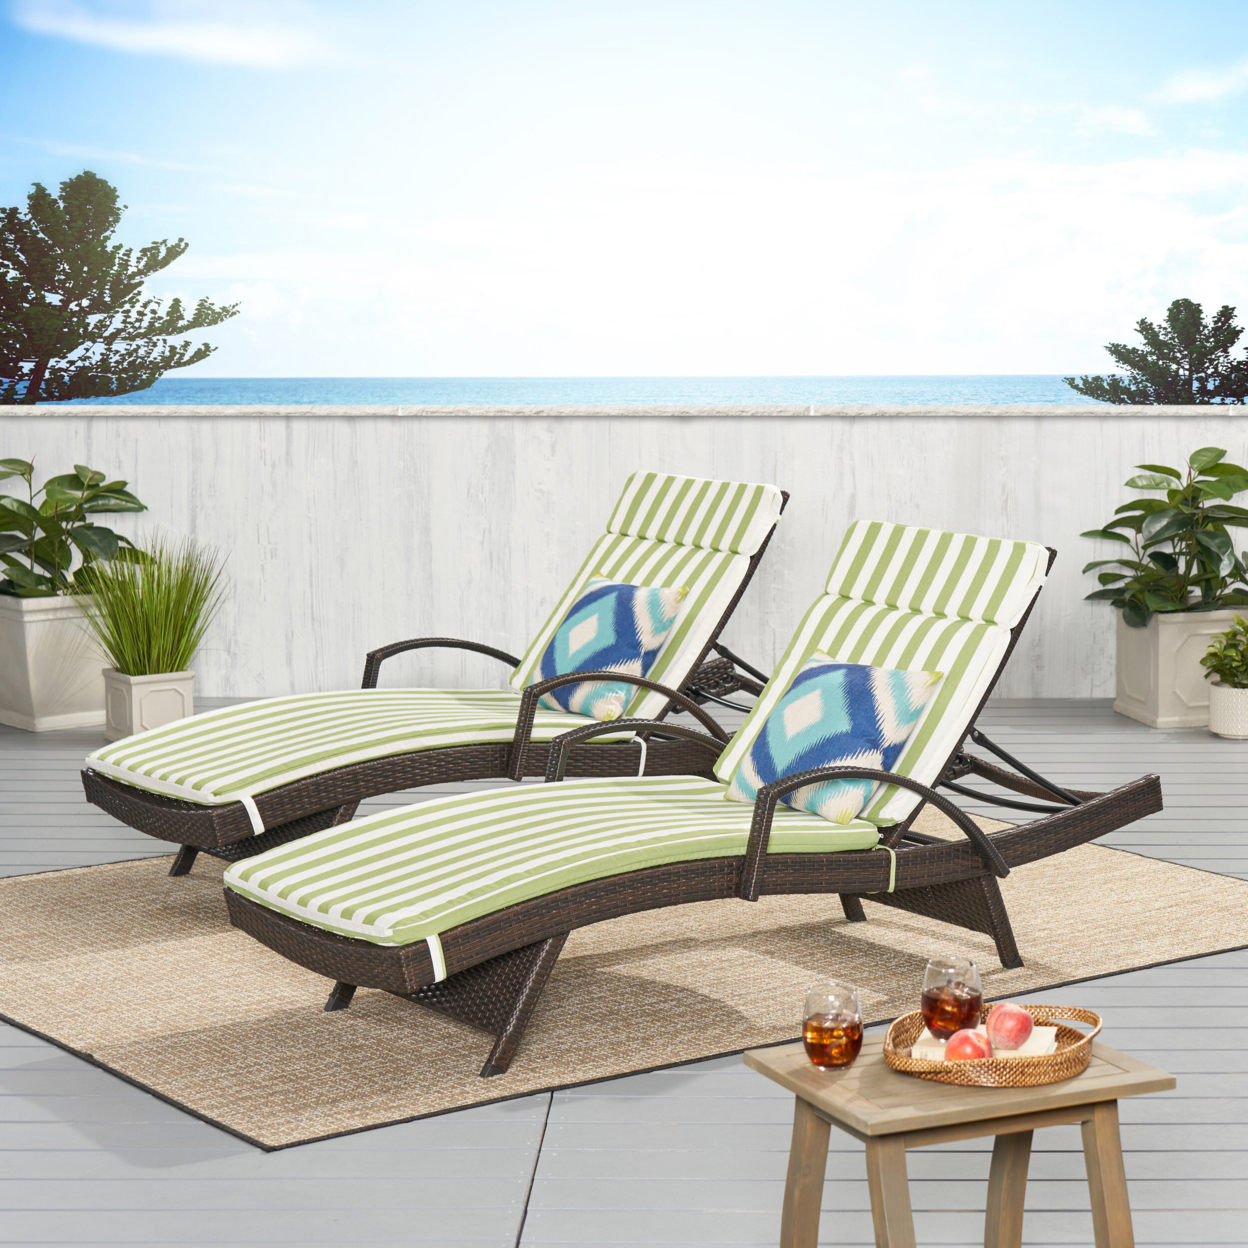 Lakeport Outdoor Wicker Lounge With Water Resistant Cushion (Set Of 2) - Green/White Cushion